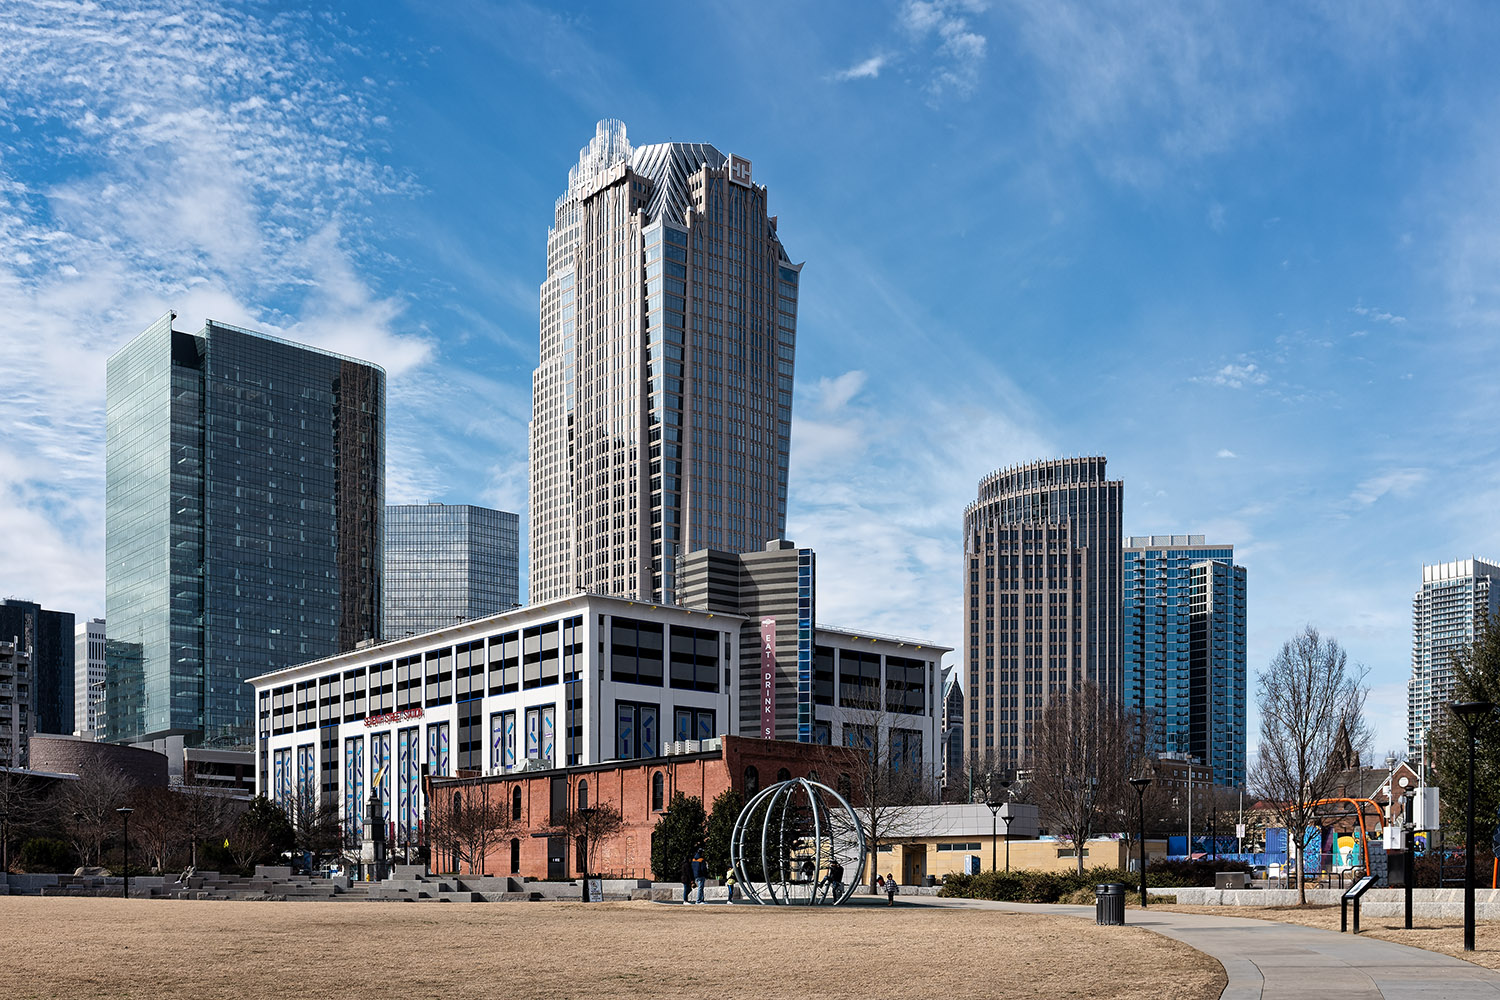 Uptown Charlotte seen from First Ward Park